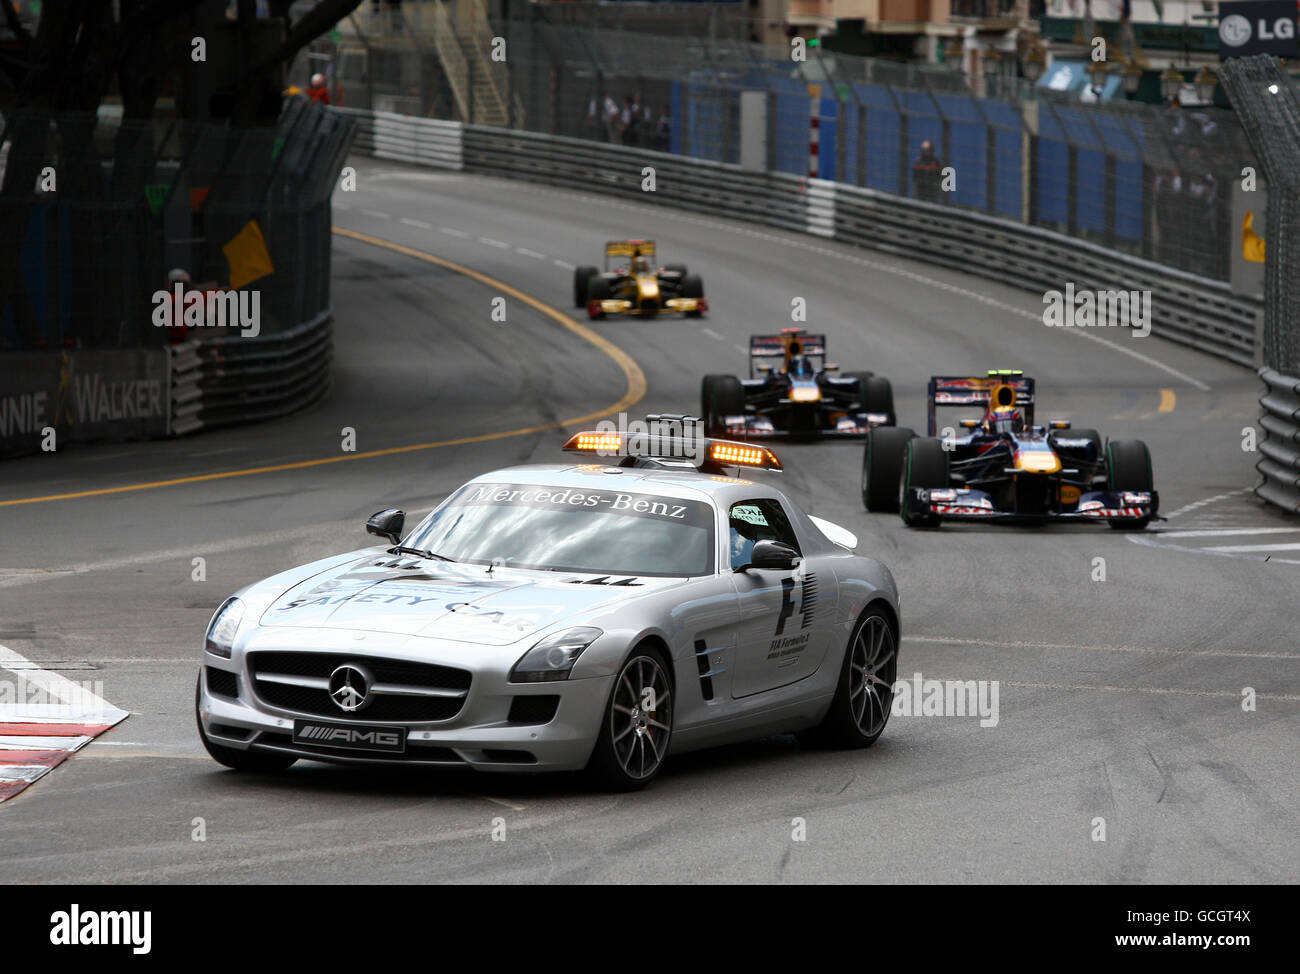 The 2010 Mercedes-Benz SLS AMG F1 Safety Car leads Red Bull driver Mark Webber and the rest of the drivers around the circuit during the Monaco Grand Prix at the Circuit de Monaco, Monte Carlo. Stock Photo